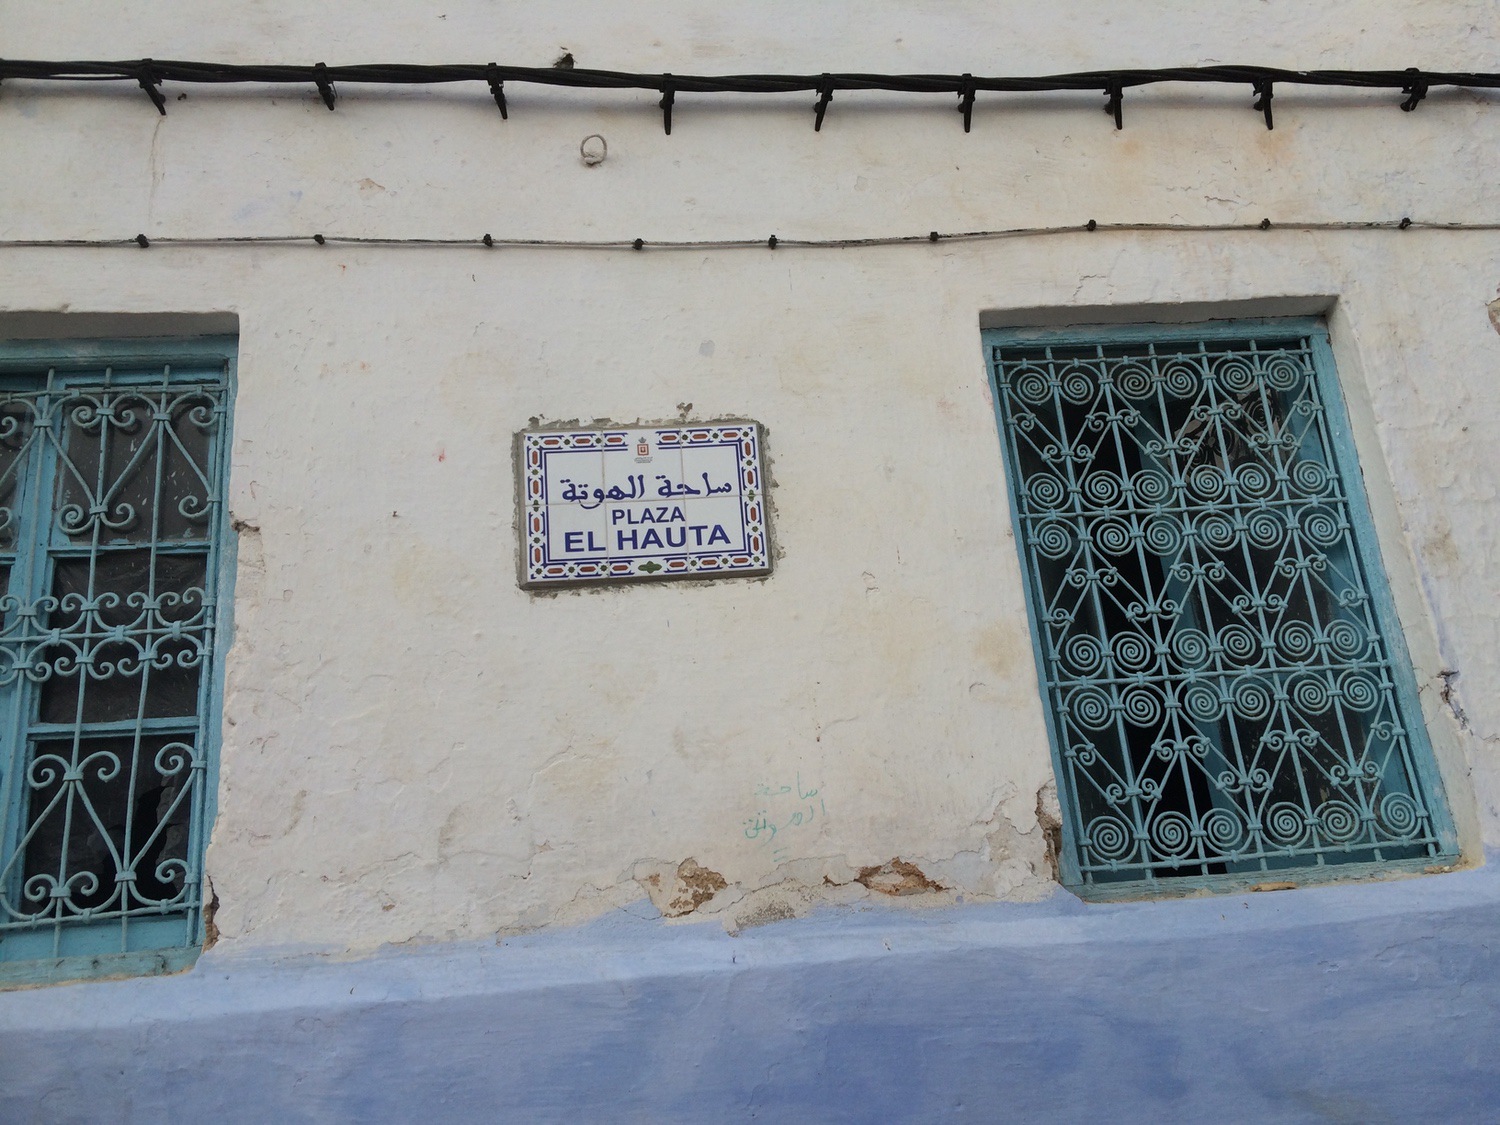 View of the faïence tile for Plaza El Hauta in Arabic and Spanish